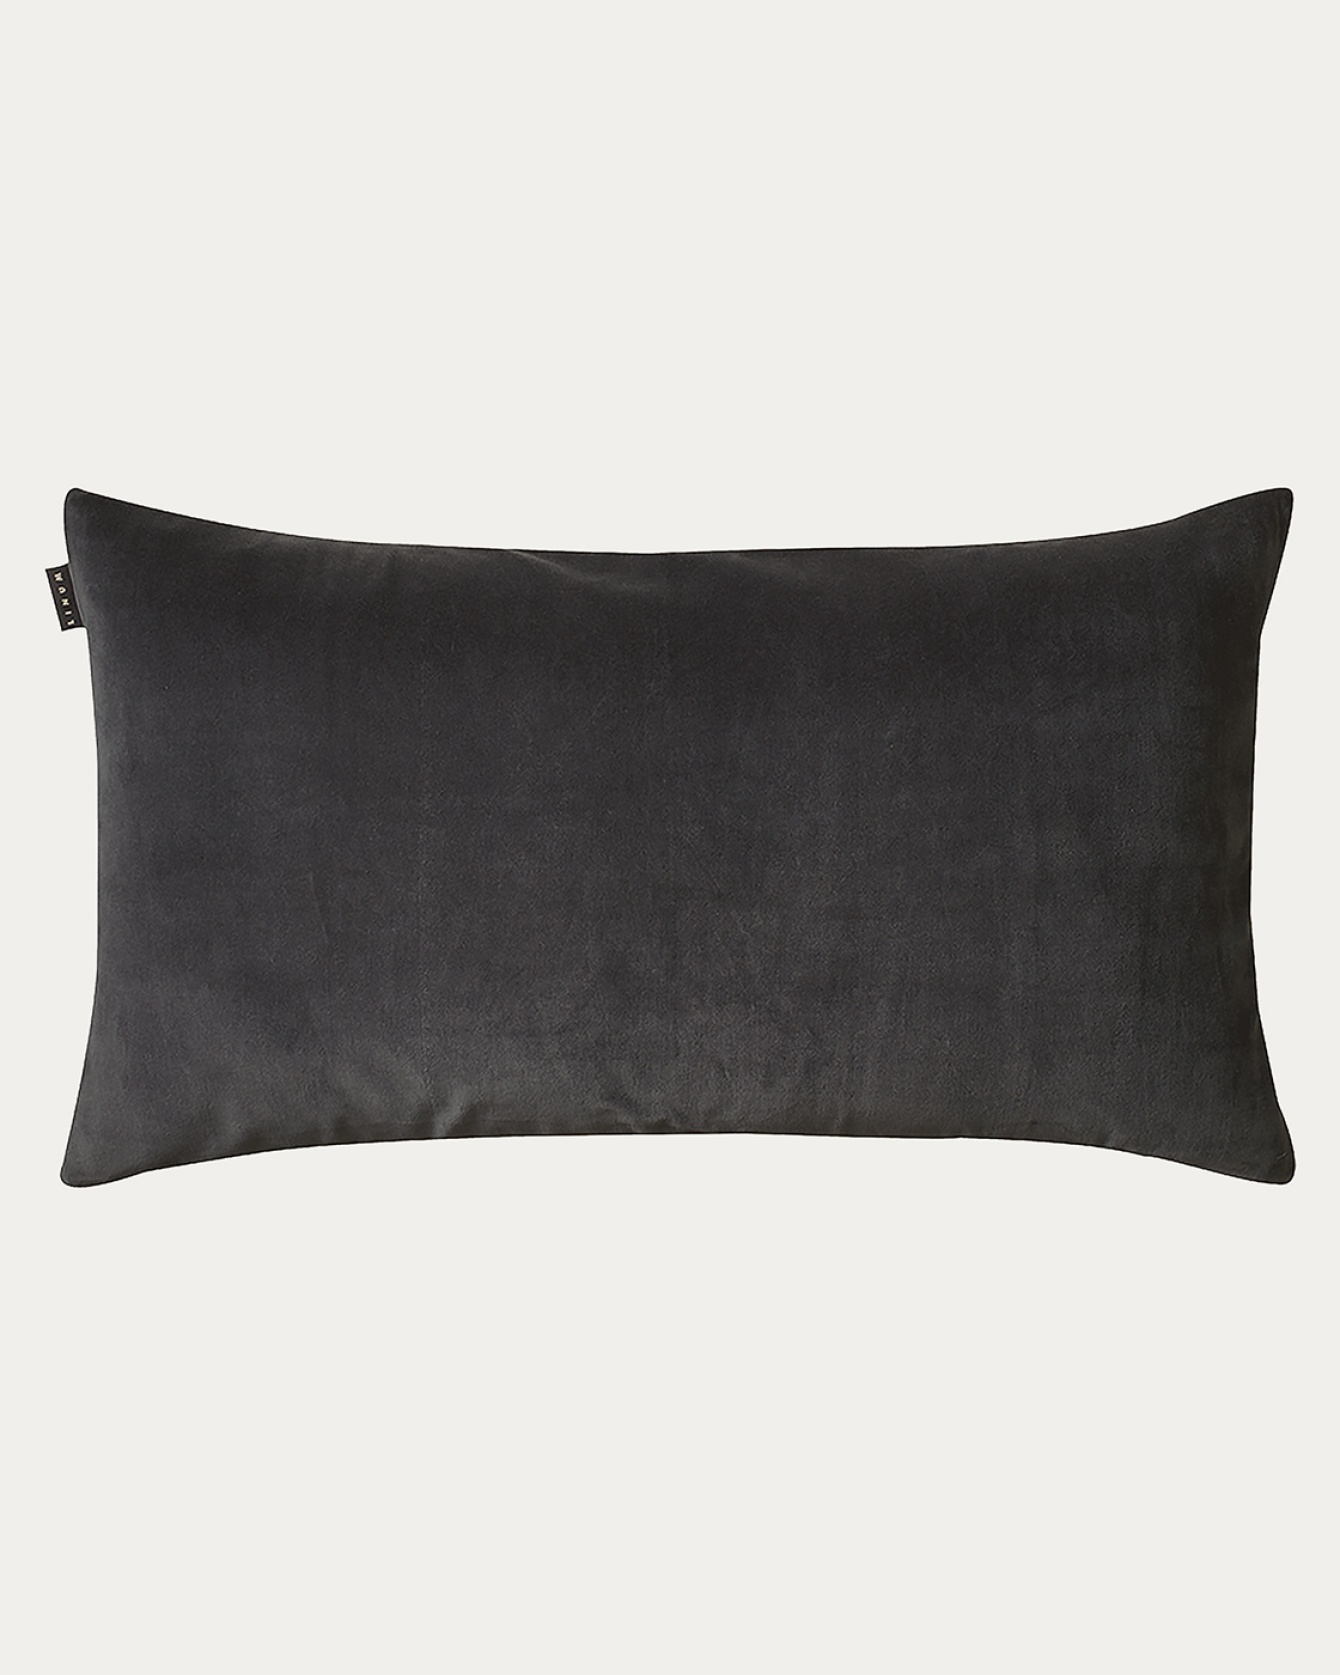 Product image dark charcoal grey PAOLO cushion cover made of soft cotton velvet and 100% linen from LINUM DESIGN. Size 50x90 cm.